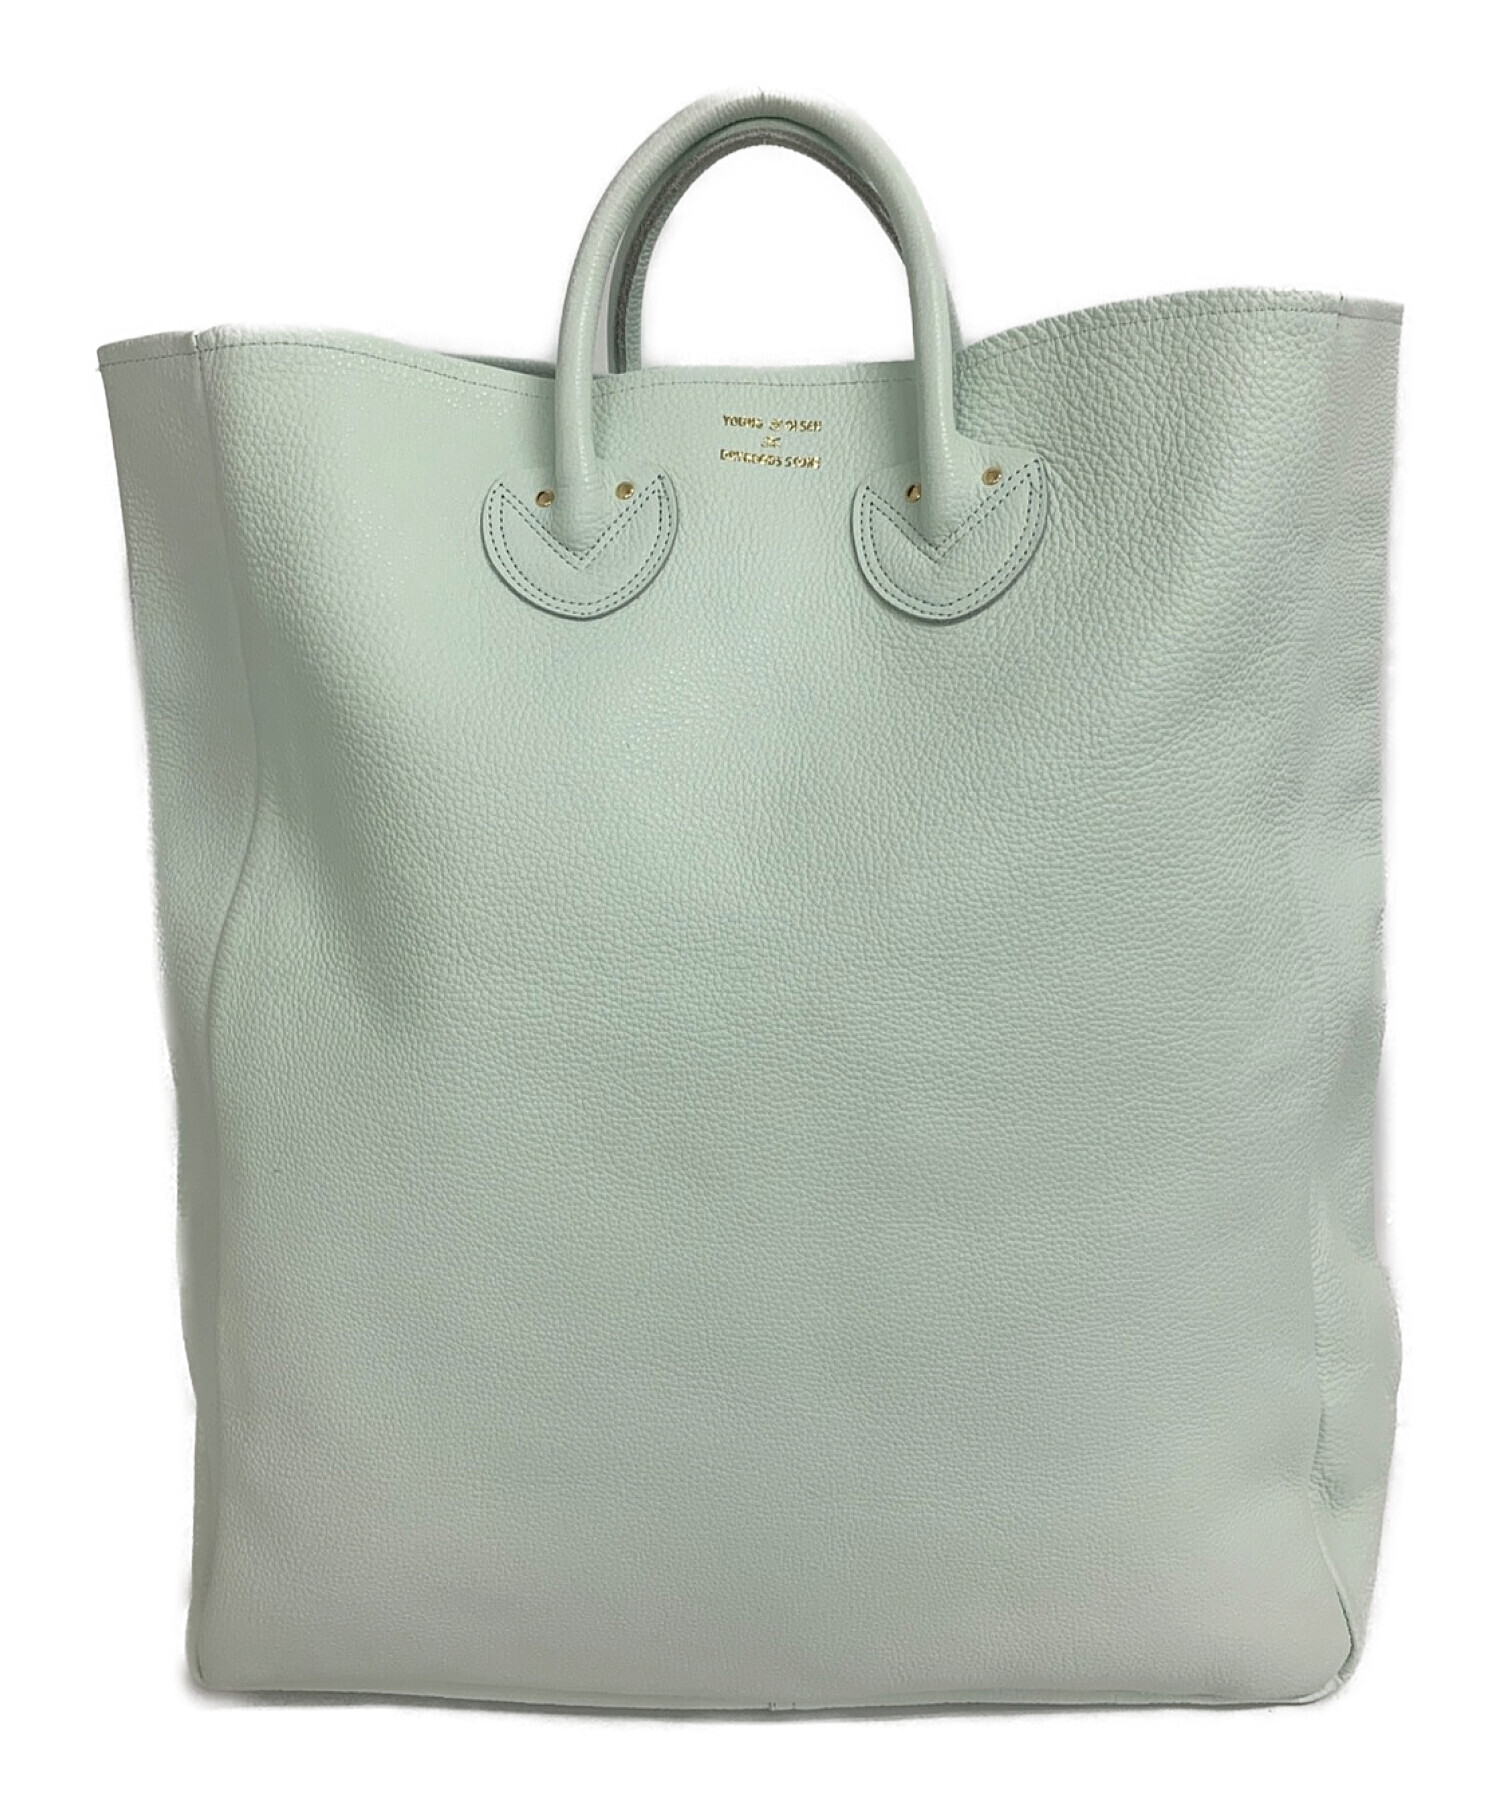 YOUNG & OLSEN The DRYGOODS STORE (ヤングアンドオルセン ザ ドライグッズストア) EMBOSSED LEATHER  TOTE L ミントグリーン サイズ:-